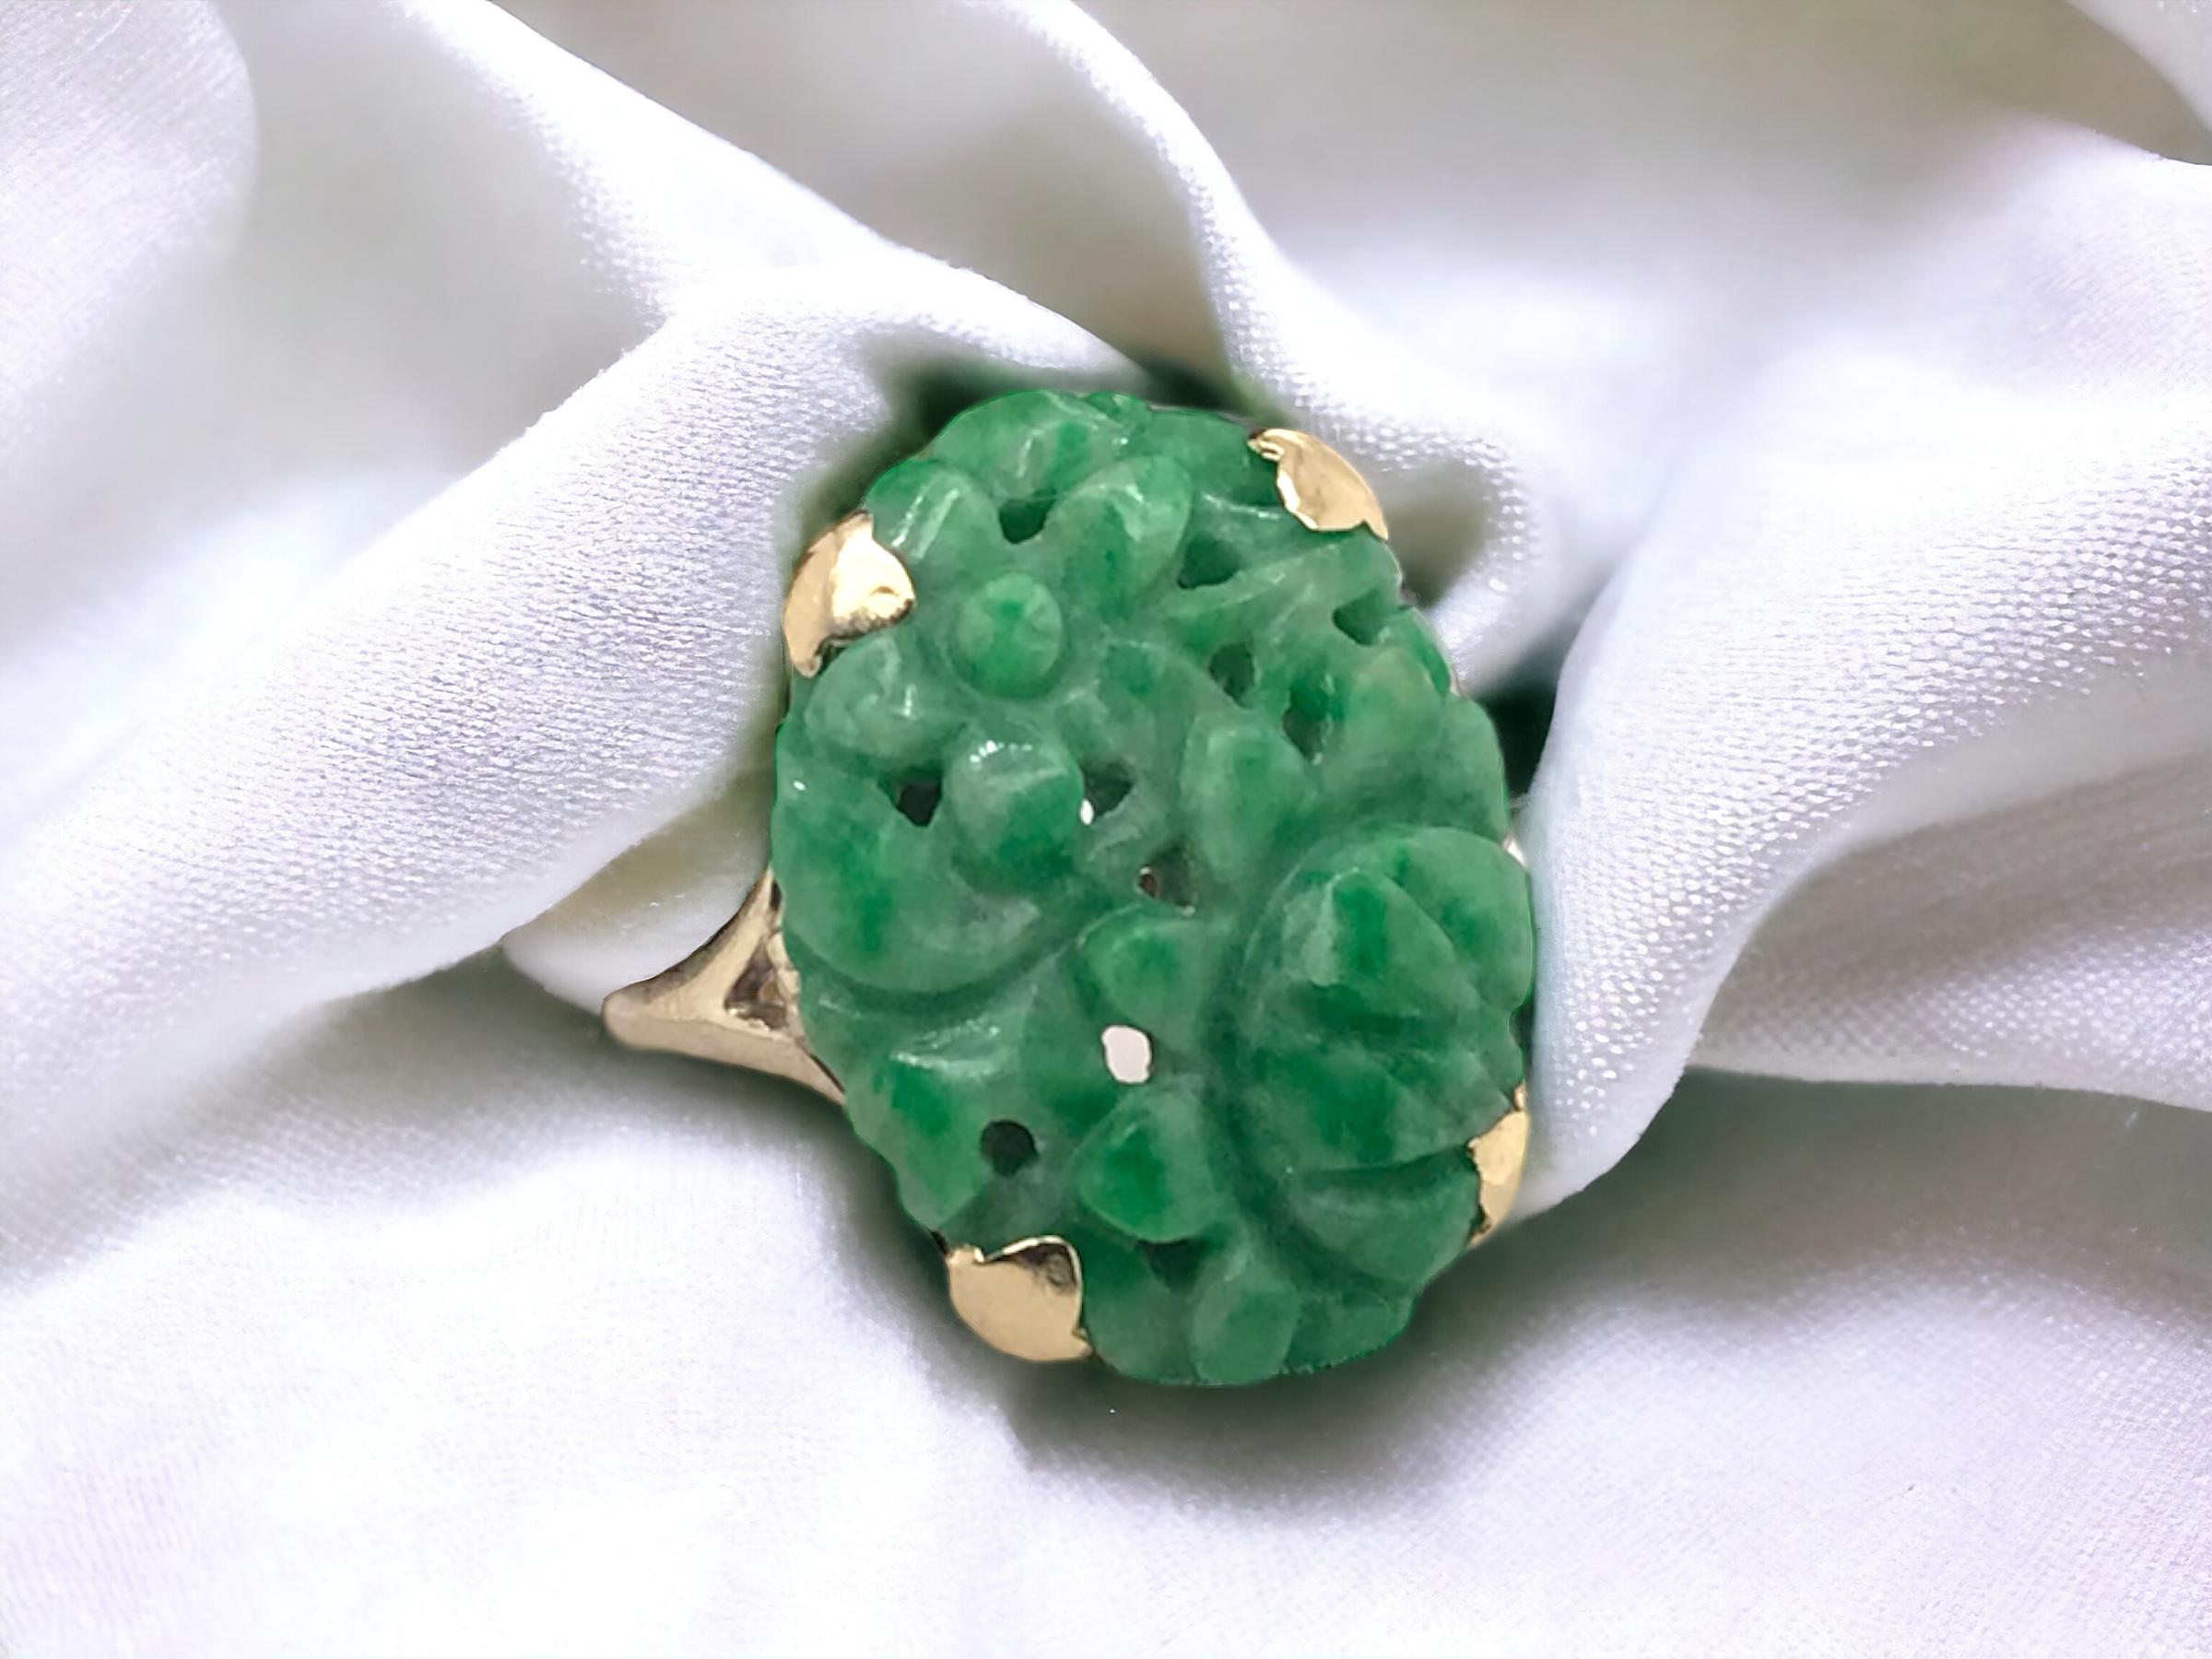 We love the hand carved details & rich green hue!

Ring Details
Era: Retro 1940 - 1960
Material: 10K Yellow Gold
Measurements: 19.9mm Length X 14.6mm Width X 4.7mm Height Off Finger
Shank Width: 2.0mm
Weight: 4.3 Grams
Finger Size: 7 1/2
Sizing